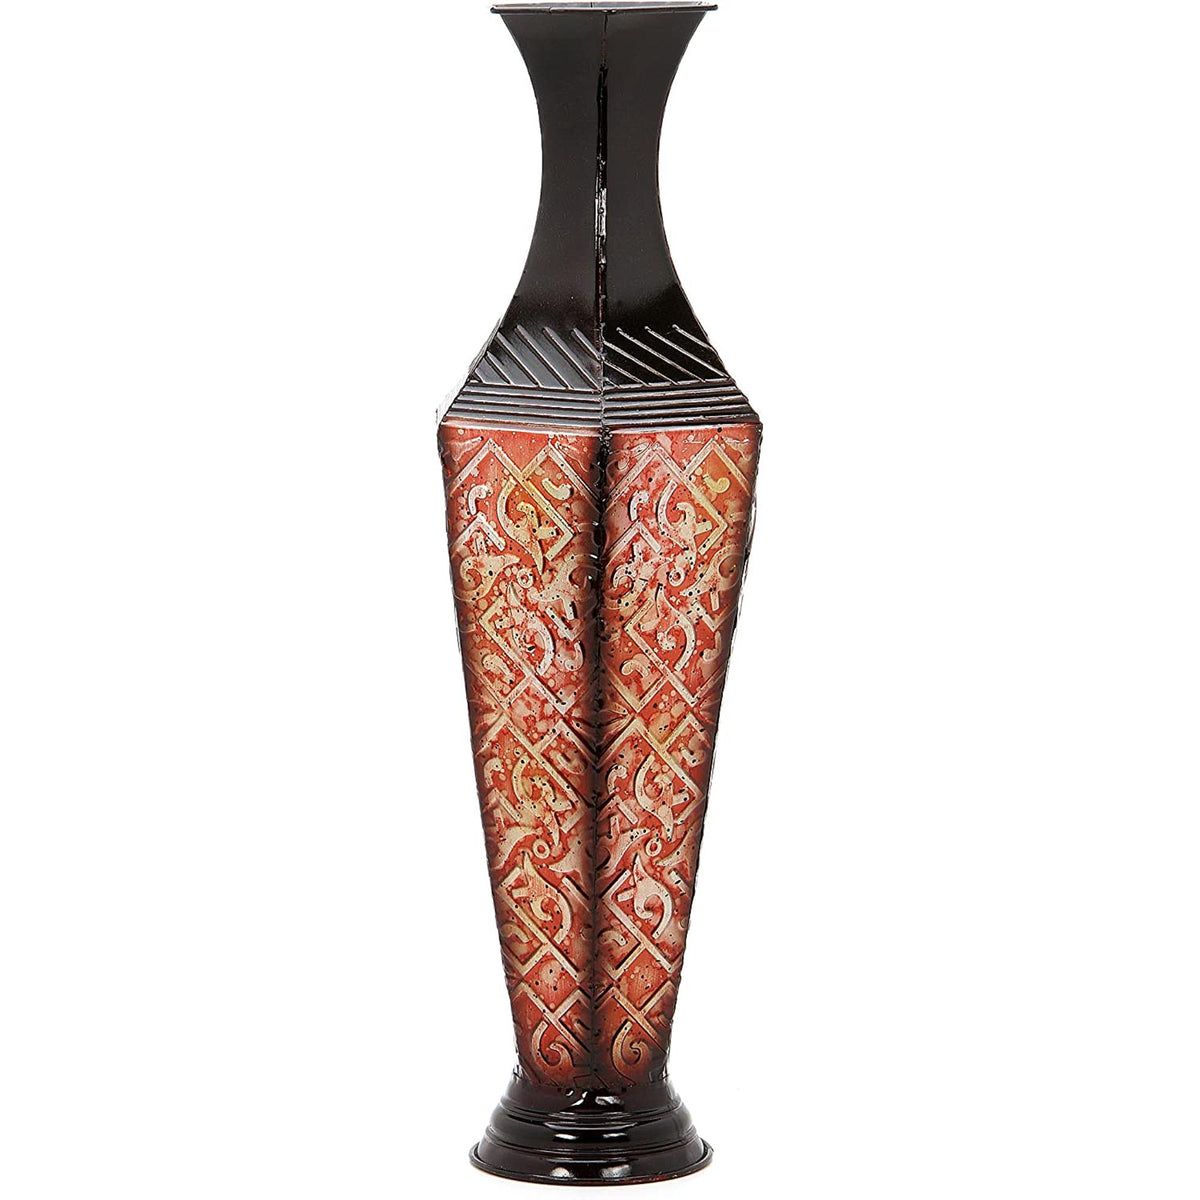 HOSLEY® Metal Embossed Tall Floor Vase, Red/Black Color,  23.5 Inches High